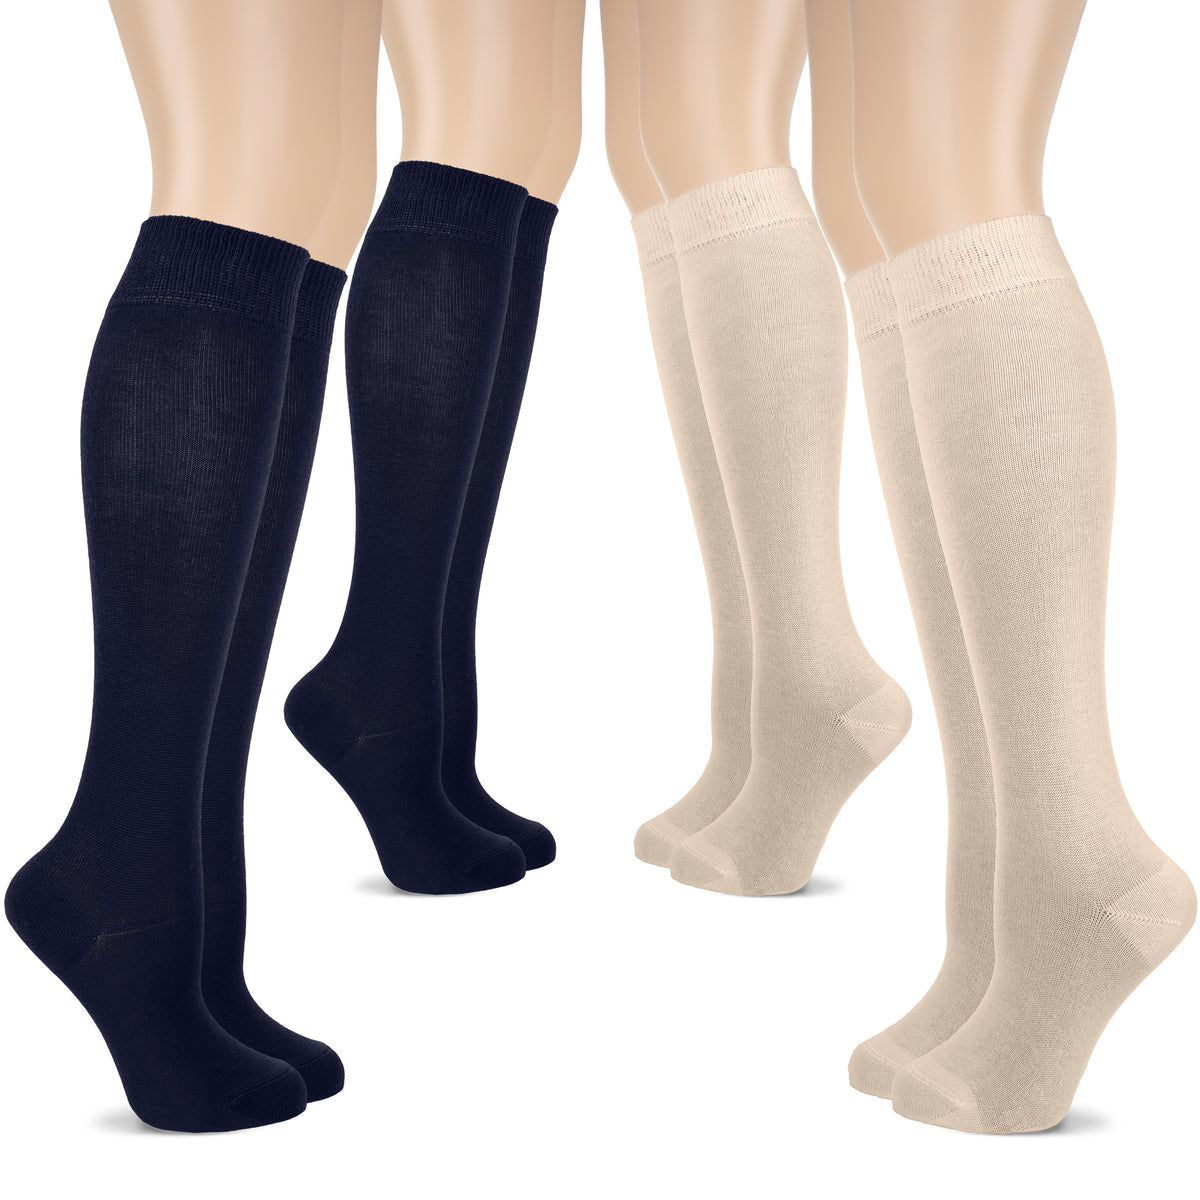 This image showcases four pairs of knee-high cotton socks for women in beige and blue hues.